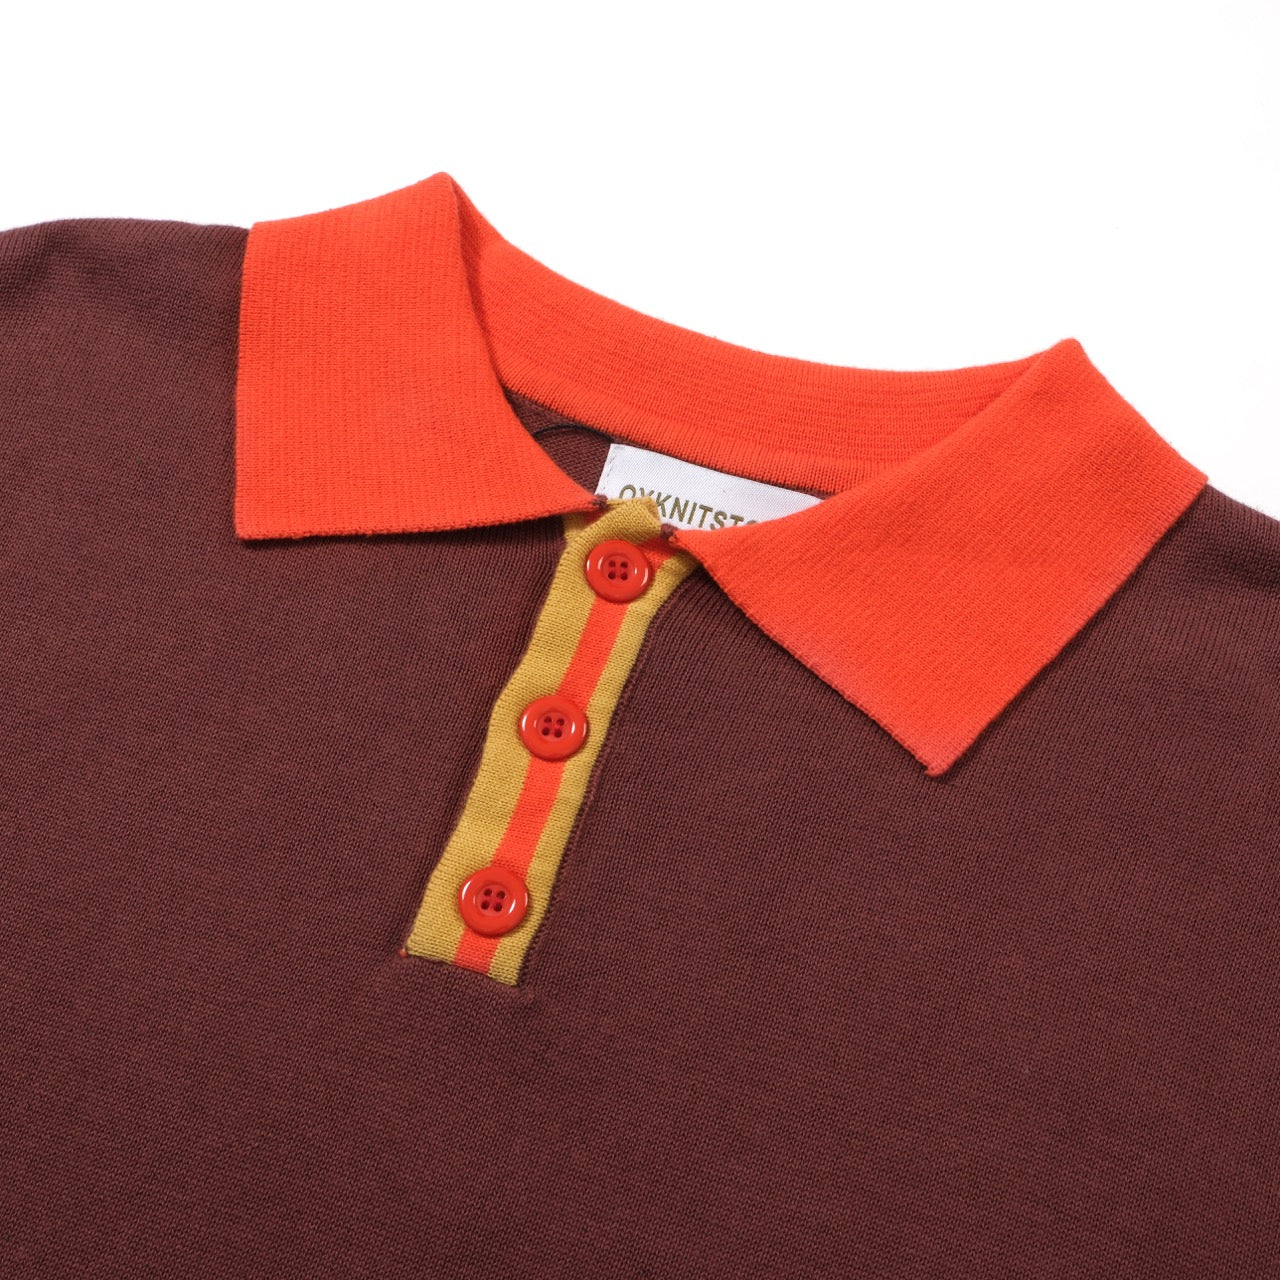 OXKNIT Men Vintage Clothing 1960s Mod Style Casual Red Knitted Dark Brown Knit Retro Polo